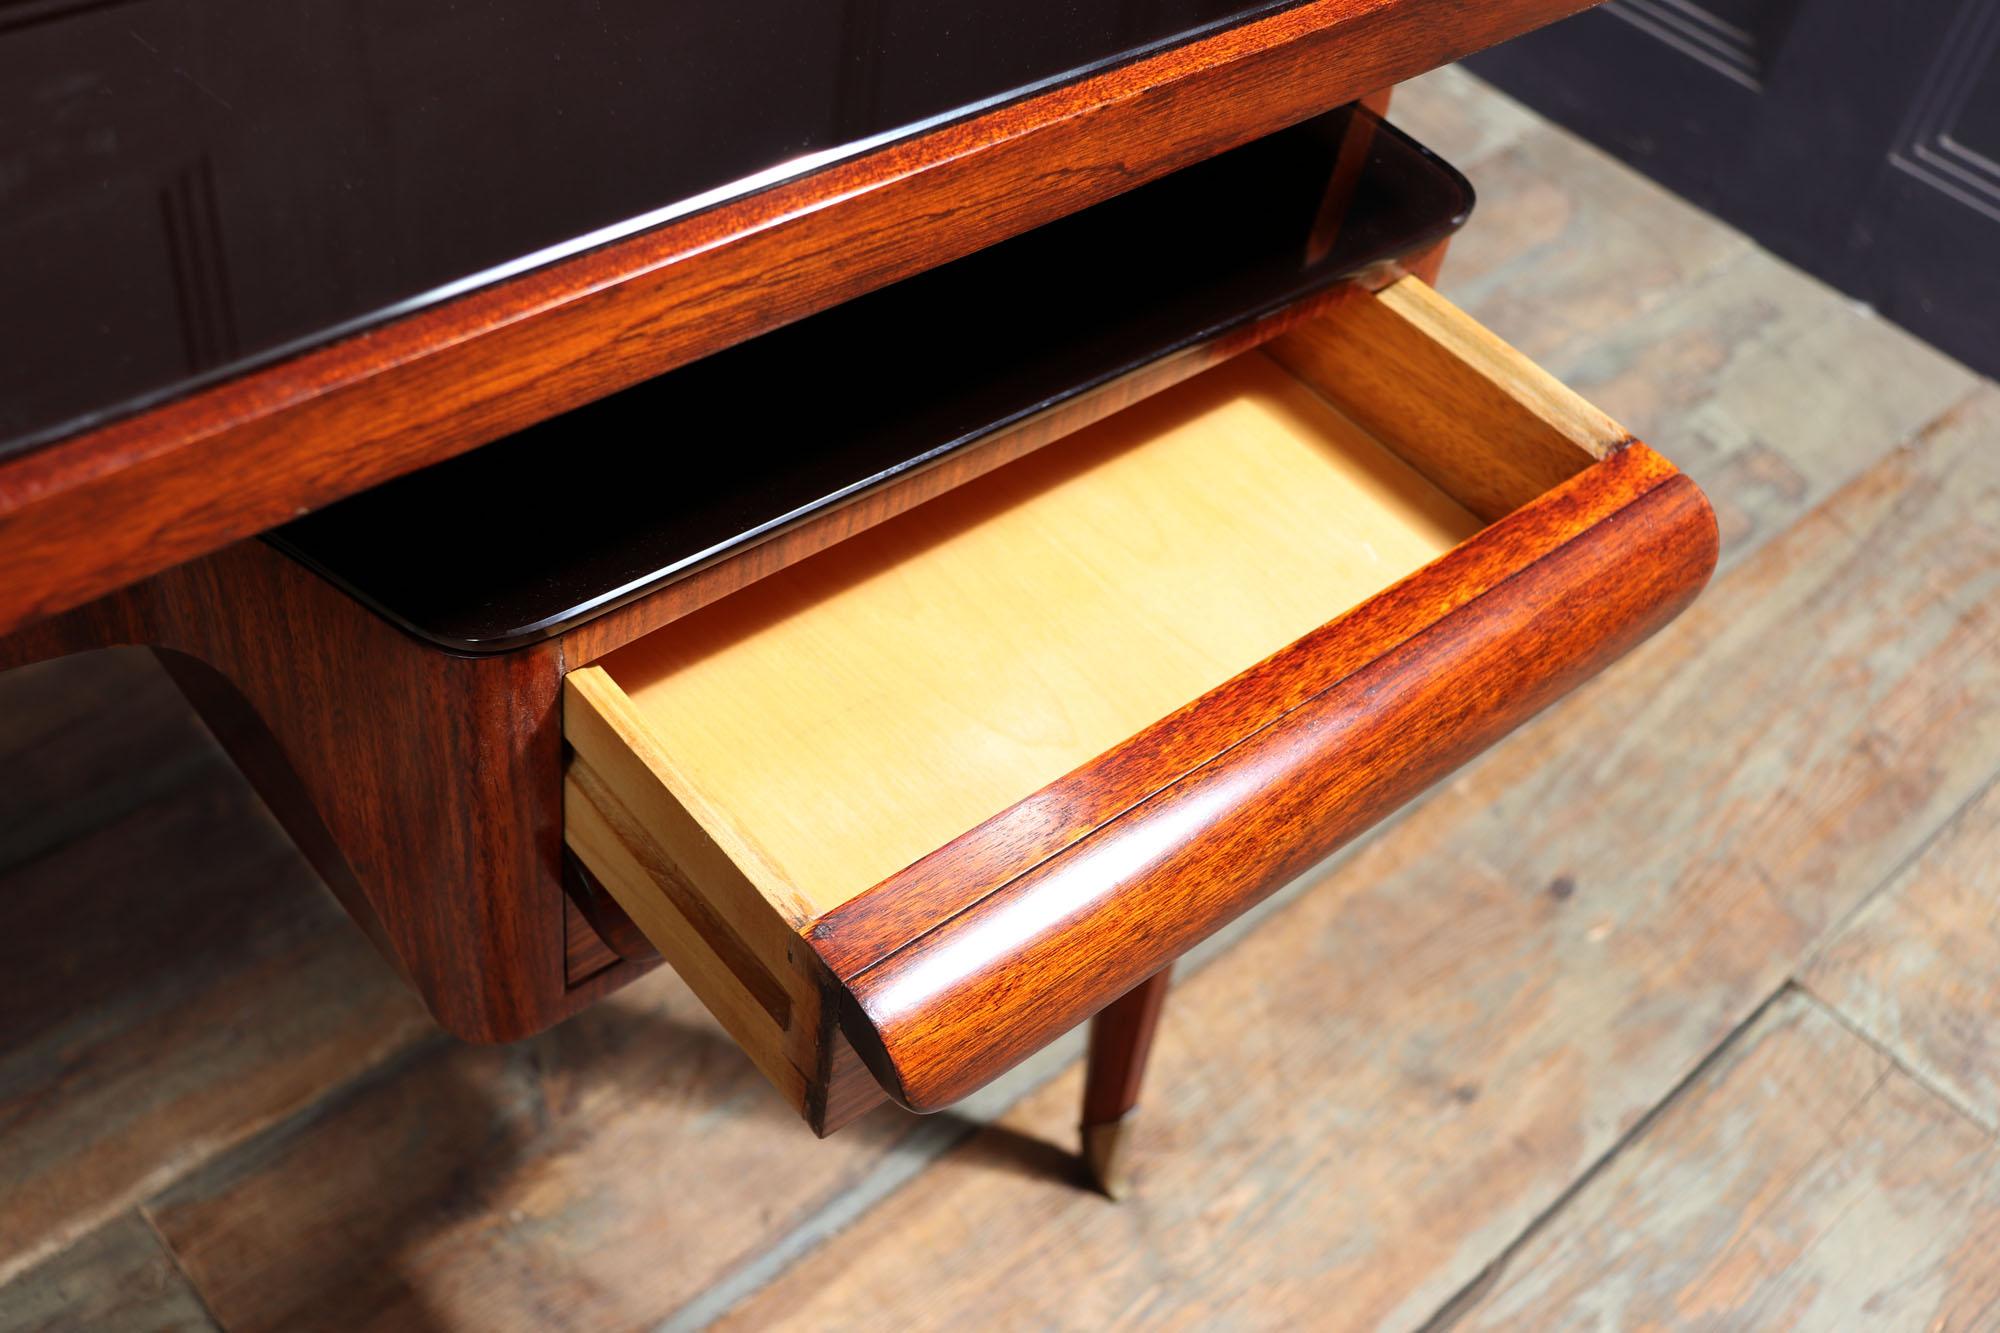 Midcentury desk by Dassi
A small desk created by Vitorrio Dassi in Italy in the 1950s, Minimalist in design the desk has two drawers that are part of the lower dark coloured shaped glass topped shelf, that is supported by the v shaped legs having